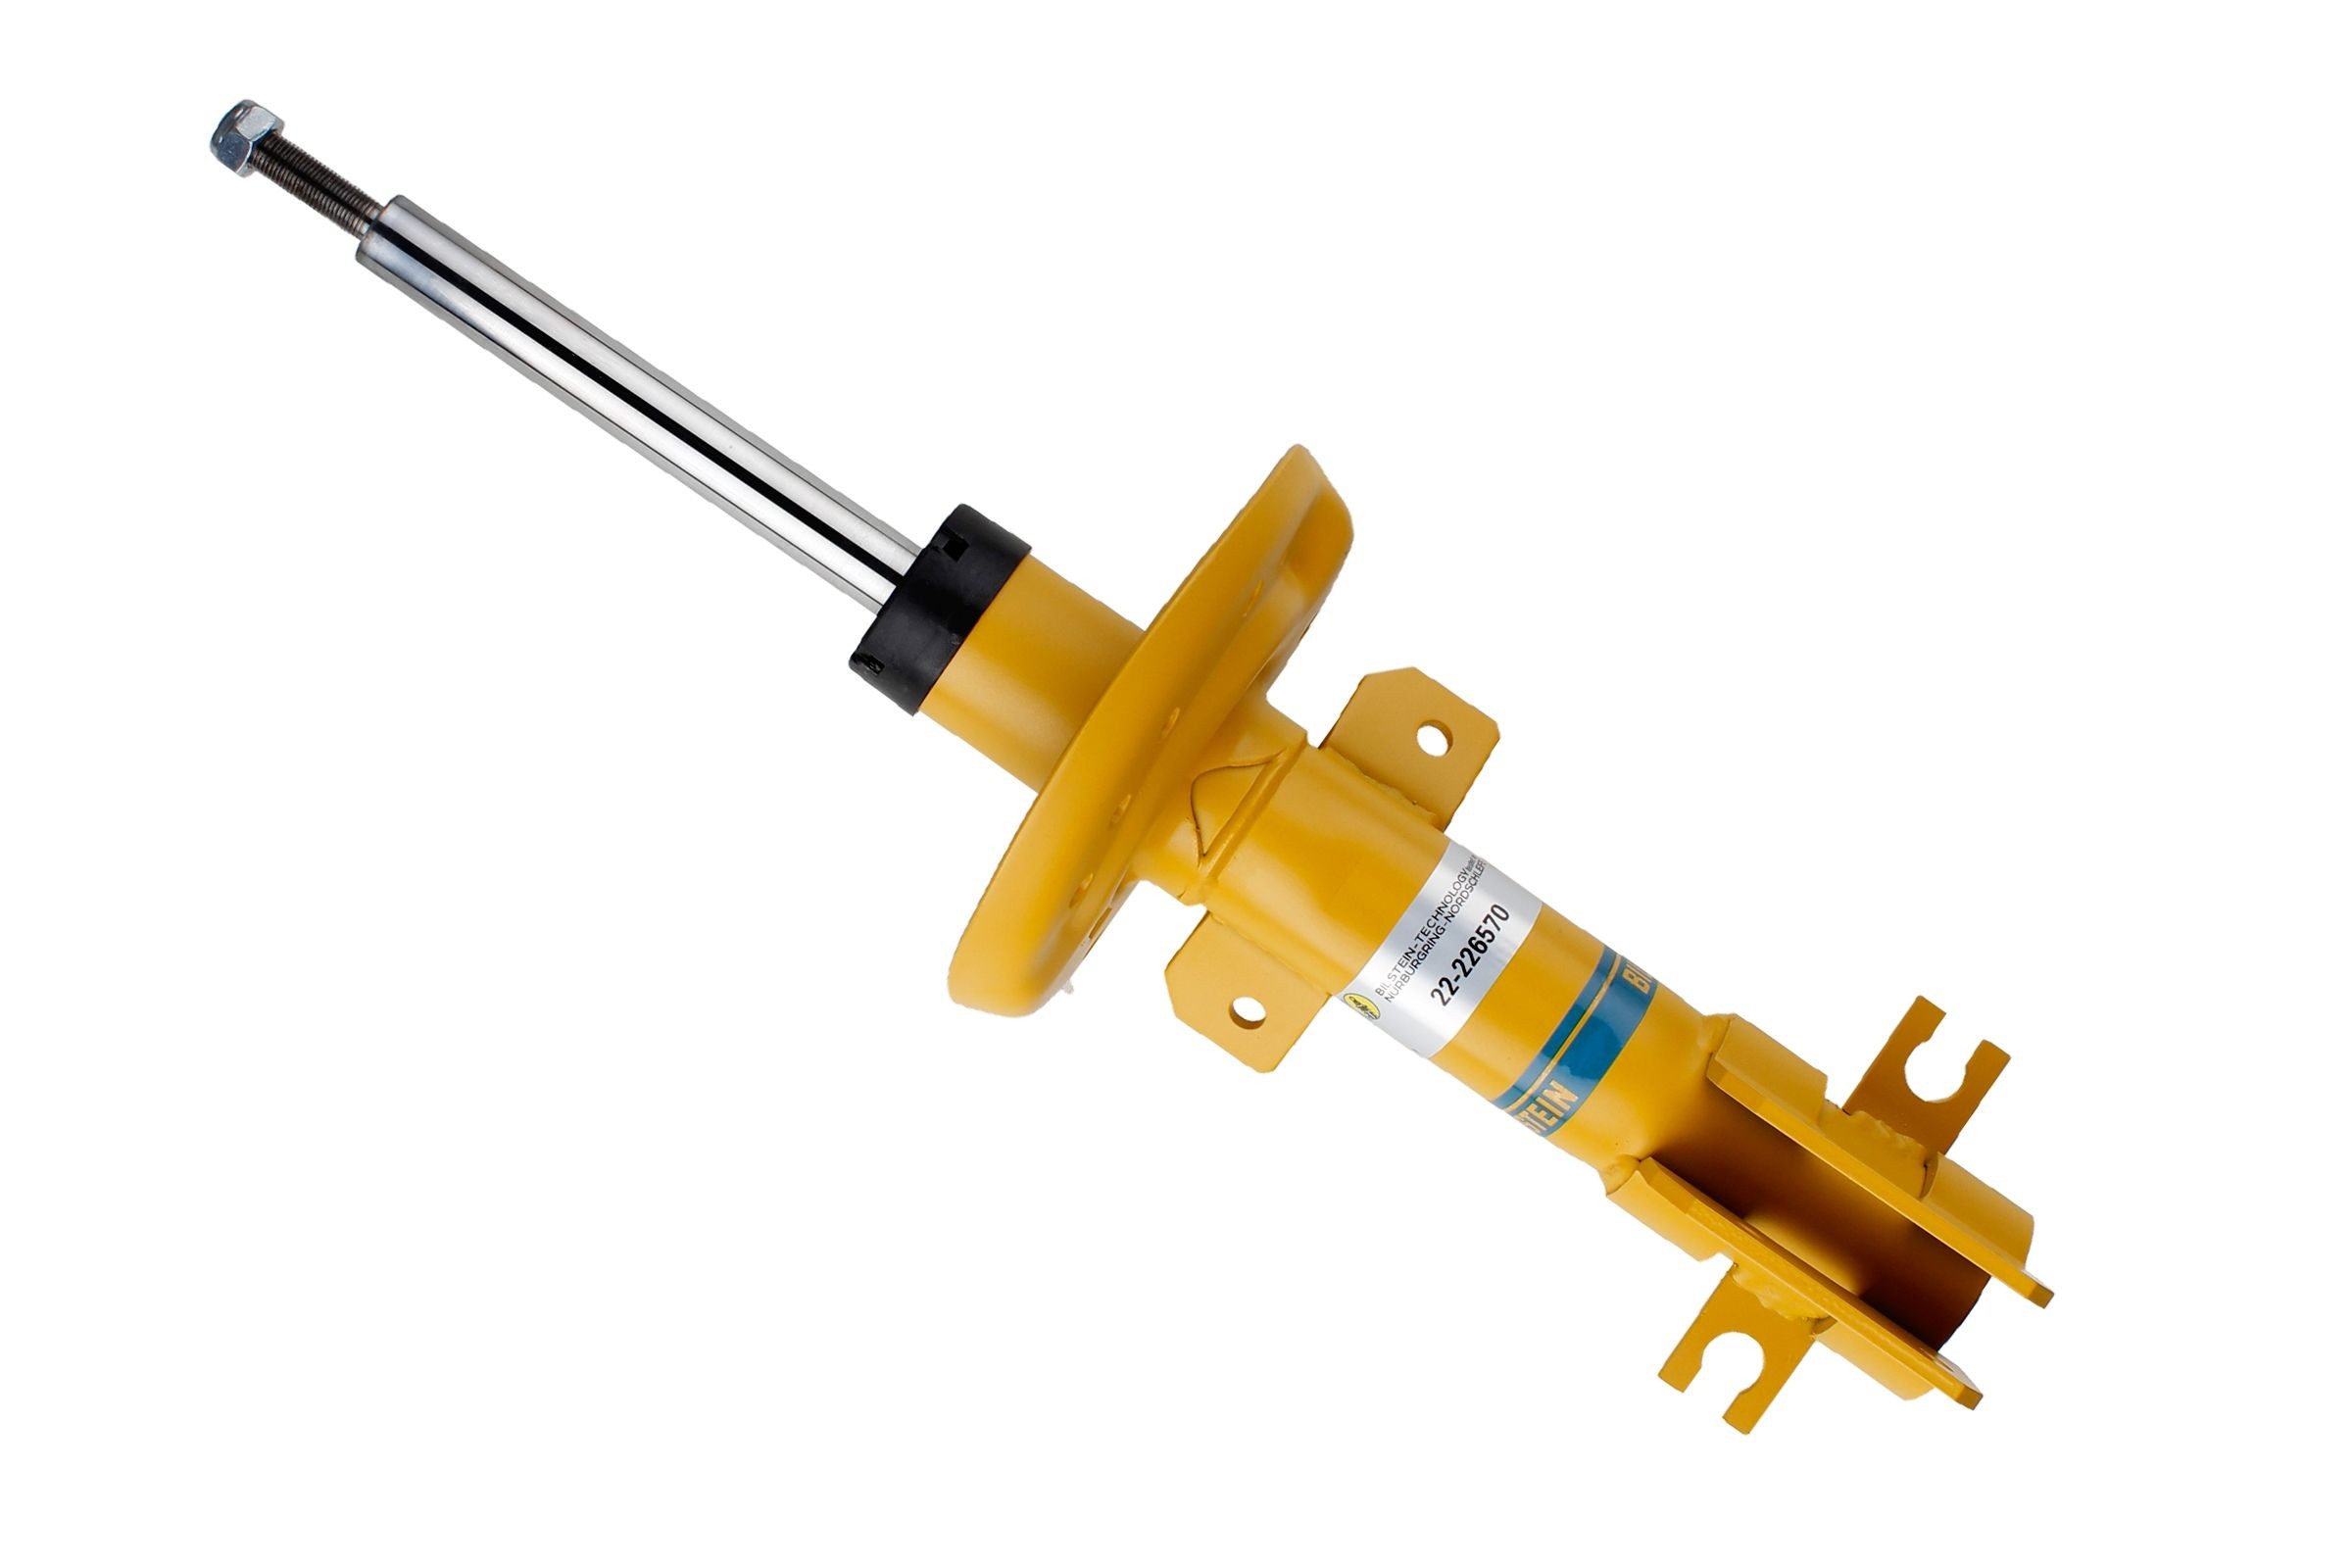 22-226570 BILSTEIN Shock absorbers CHRYSLER Front Axle, Gas Pressure, Twin-Tube, Suspension Strut, Top pin, Bottom Clamp